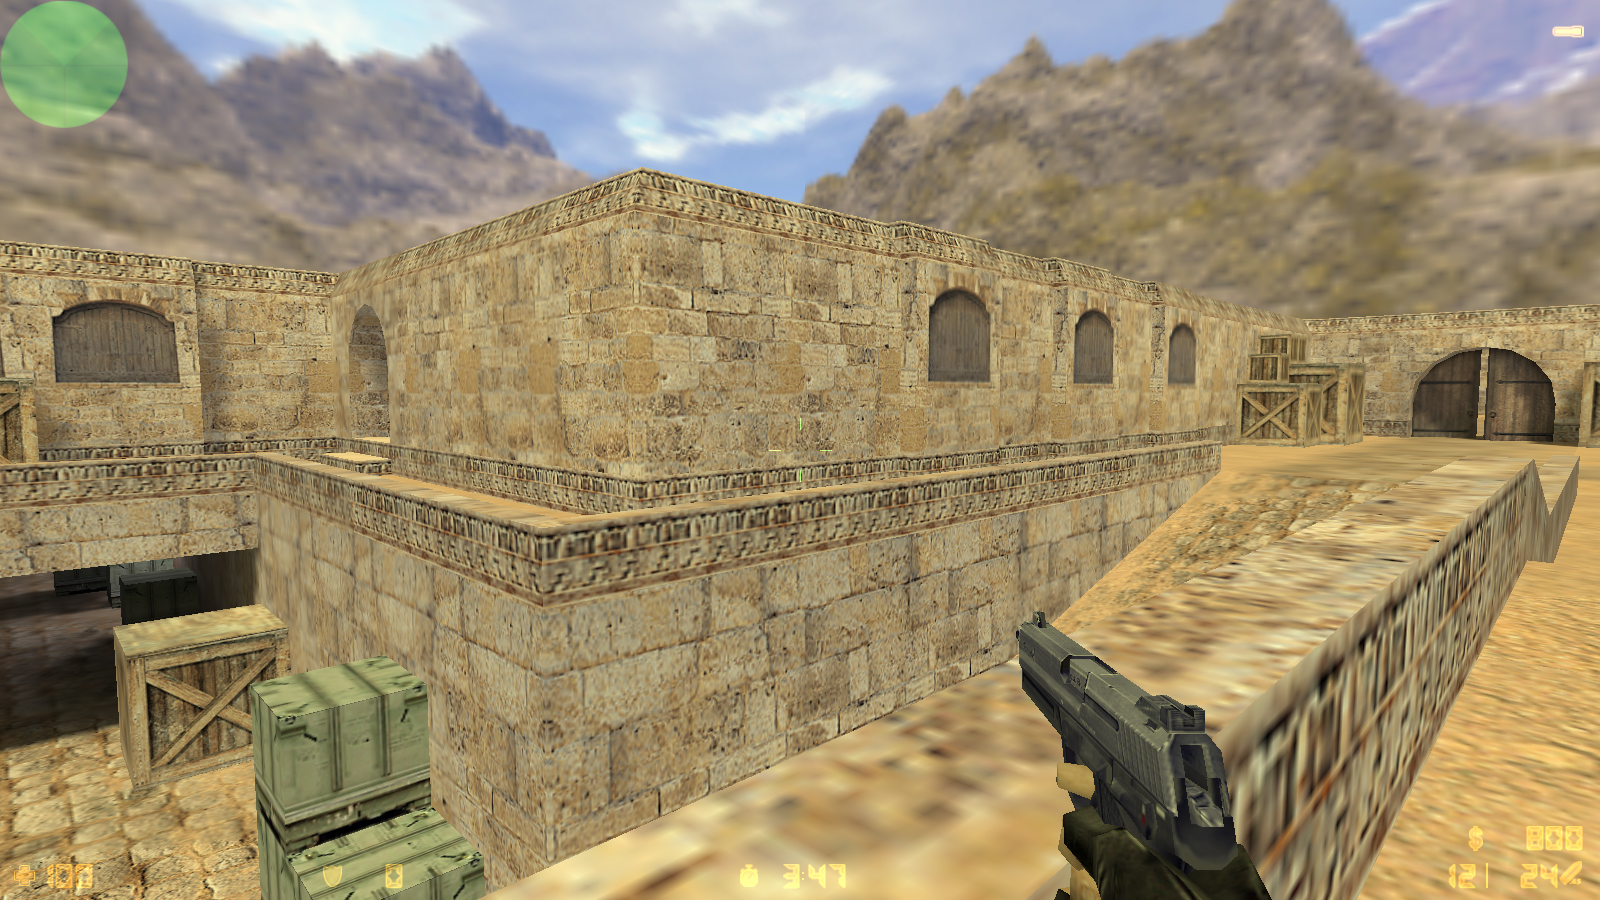 Counter-Strike: Global Offensive - Lutris